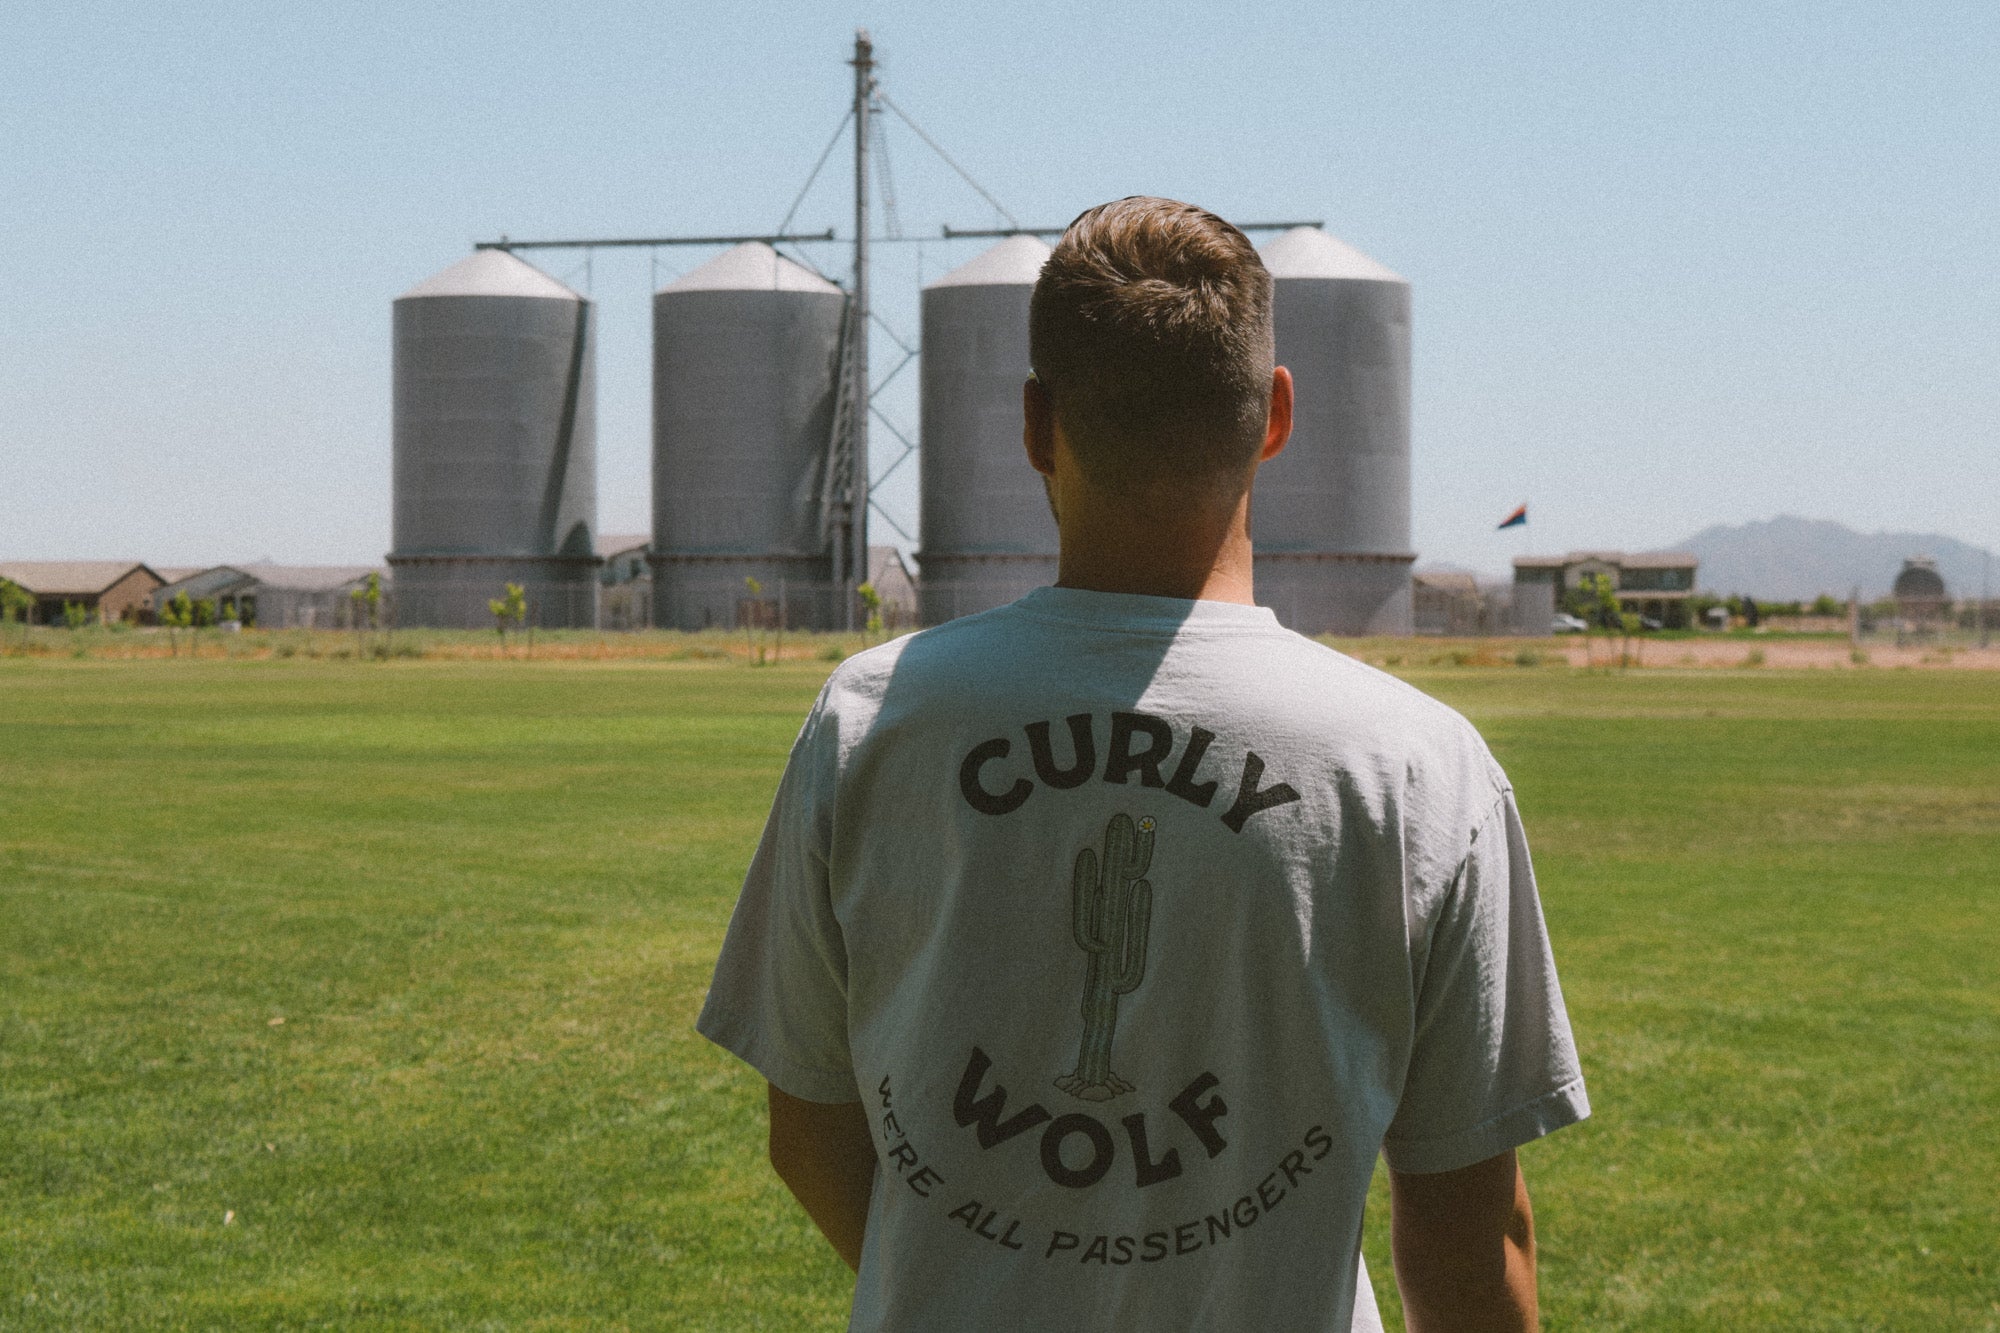 Man standing in a field with back towards camera. Shirt reads “CURLY WOLF”